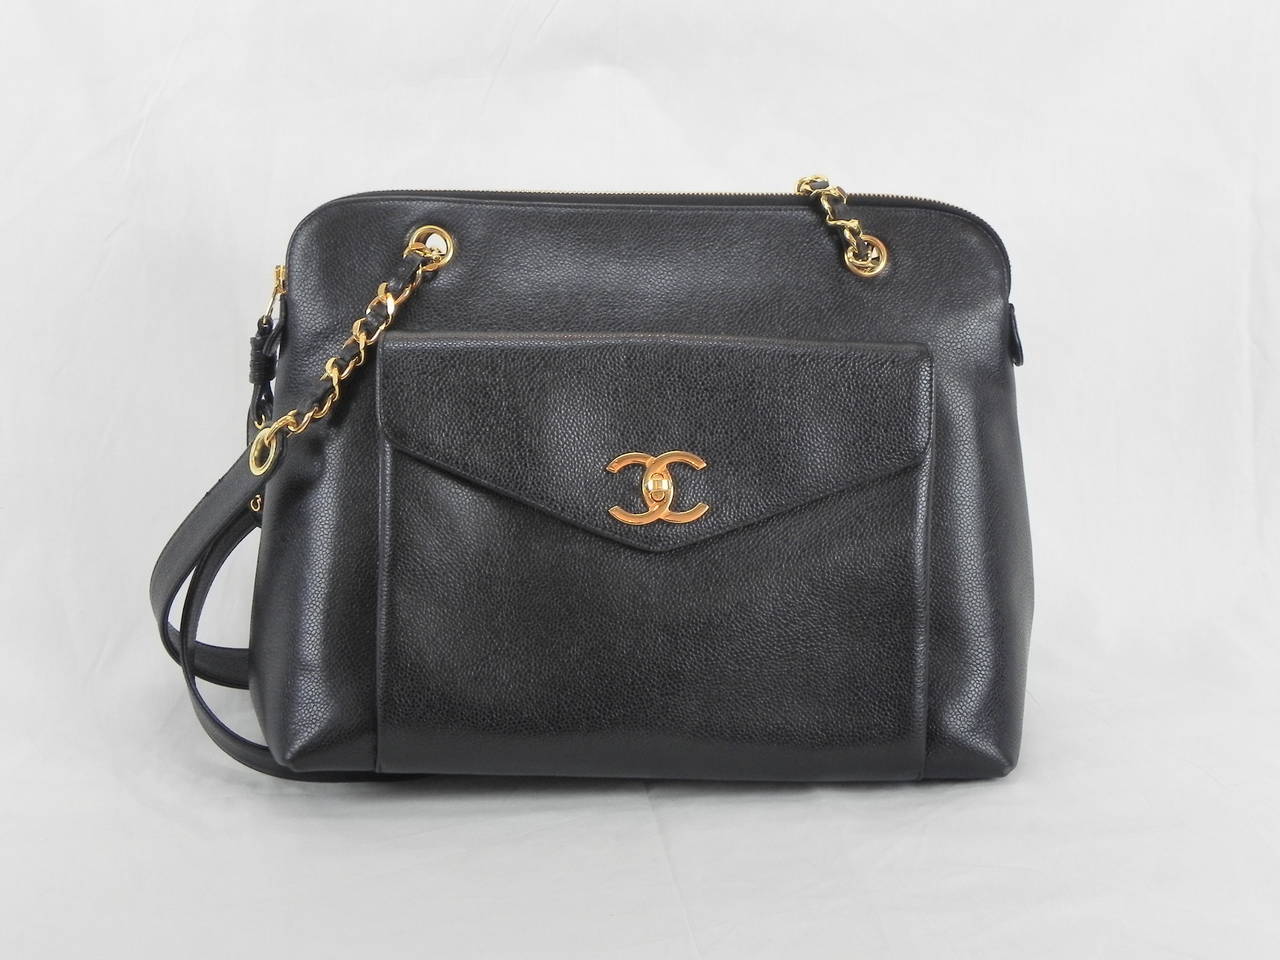 Chanel Black Caviar Shoulder Bag Vintage bag with Front Pocket 
Very Good Condition .Circa 1996 .Serial Number 3698xxx with Chanel Guarantee card .Dimensions :16 x 5 x 10.5 Inches .Zippered Bag down the Center .Great durable bag which will last